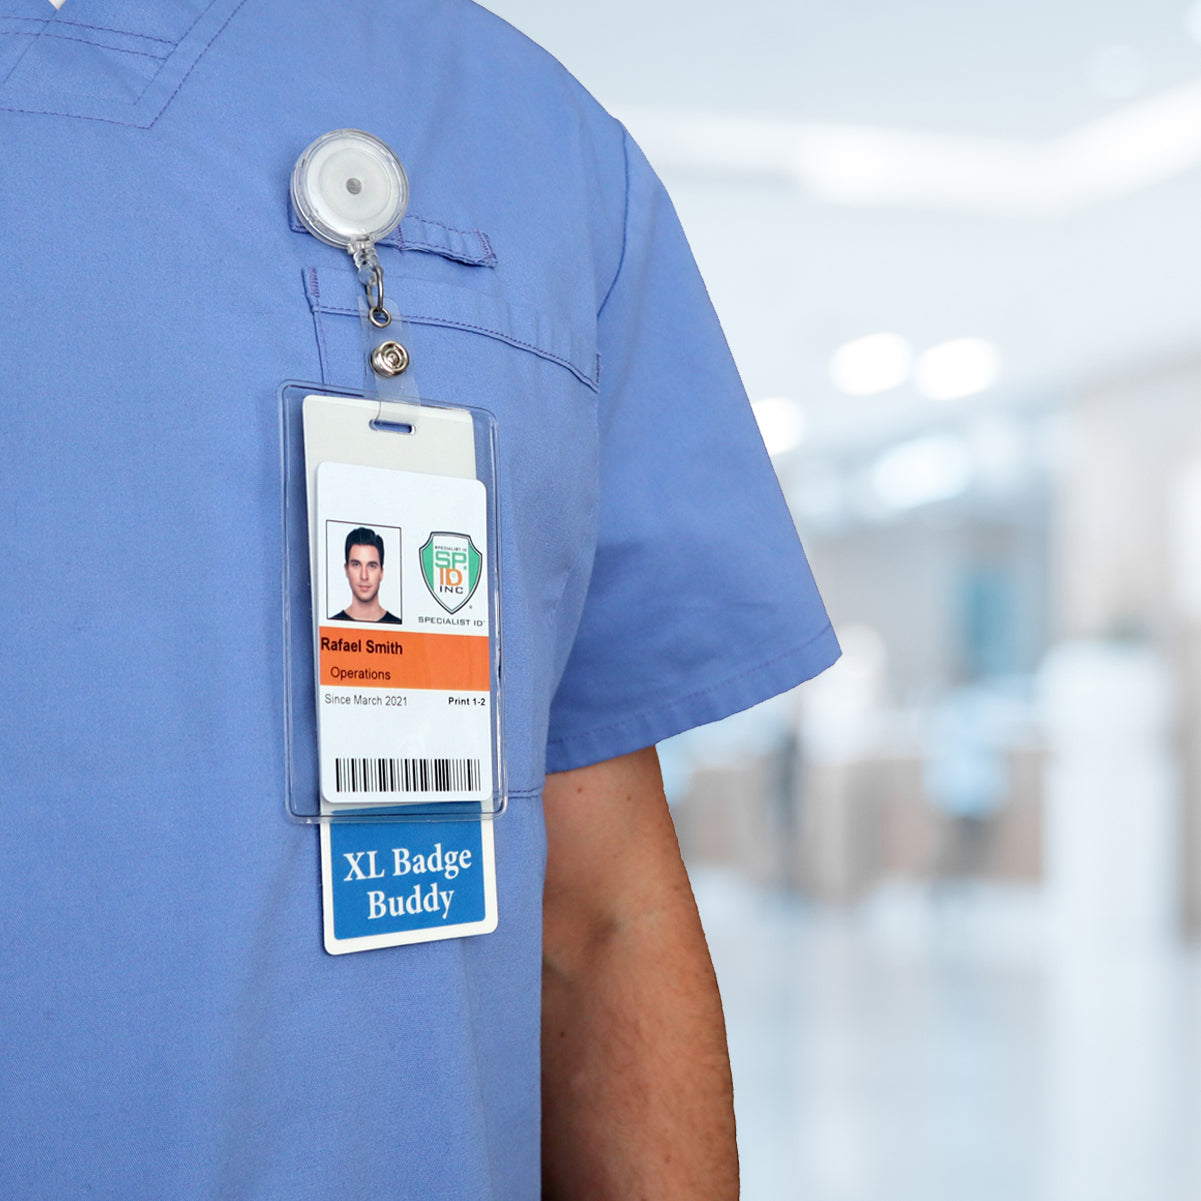 Oversized RN BSN Badge Buddy - Extra Large Vertical Badge Buddies for Nurses with BSN - Hospital ID Badge Backer